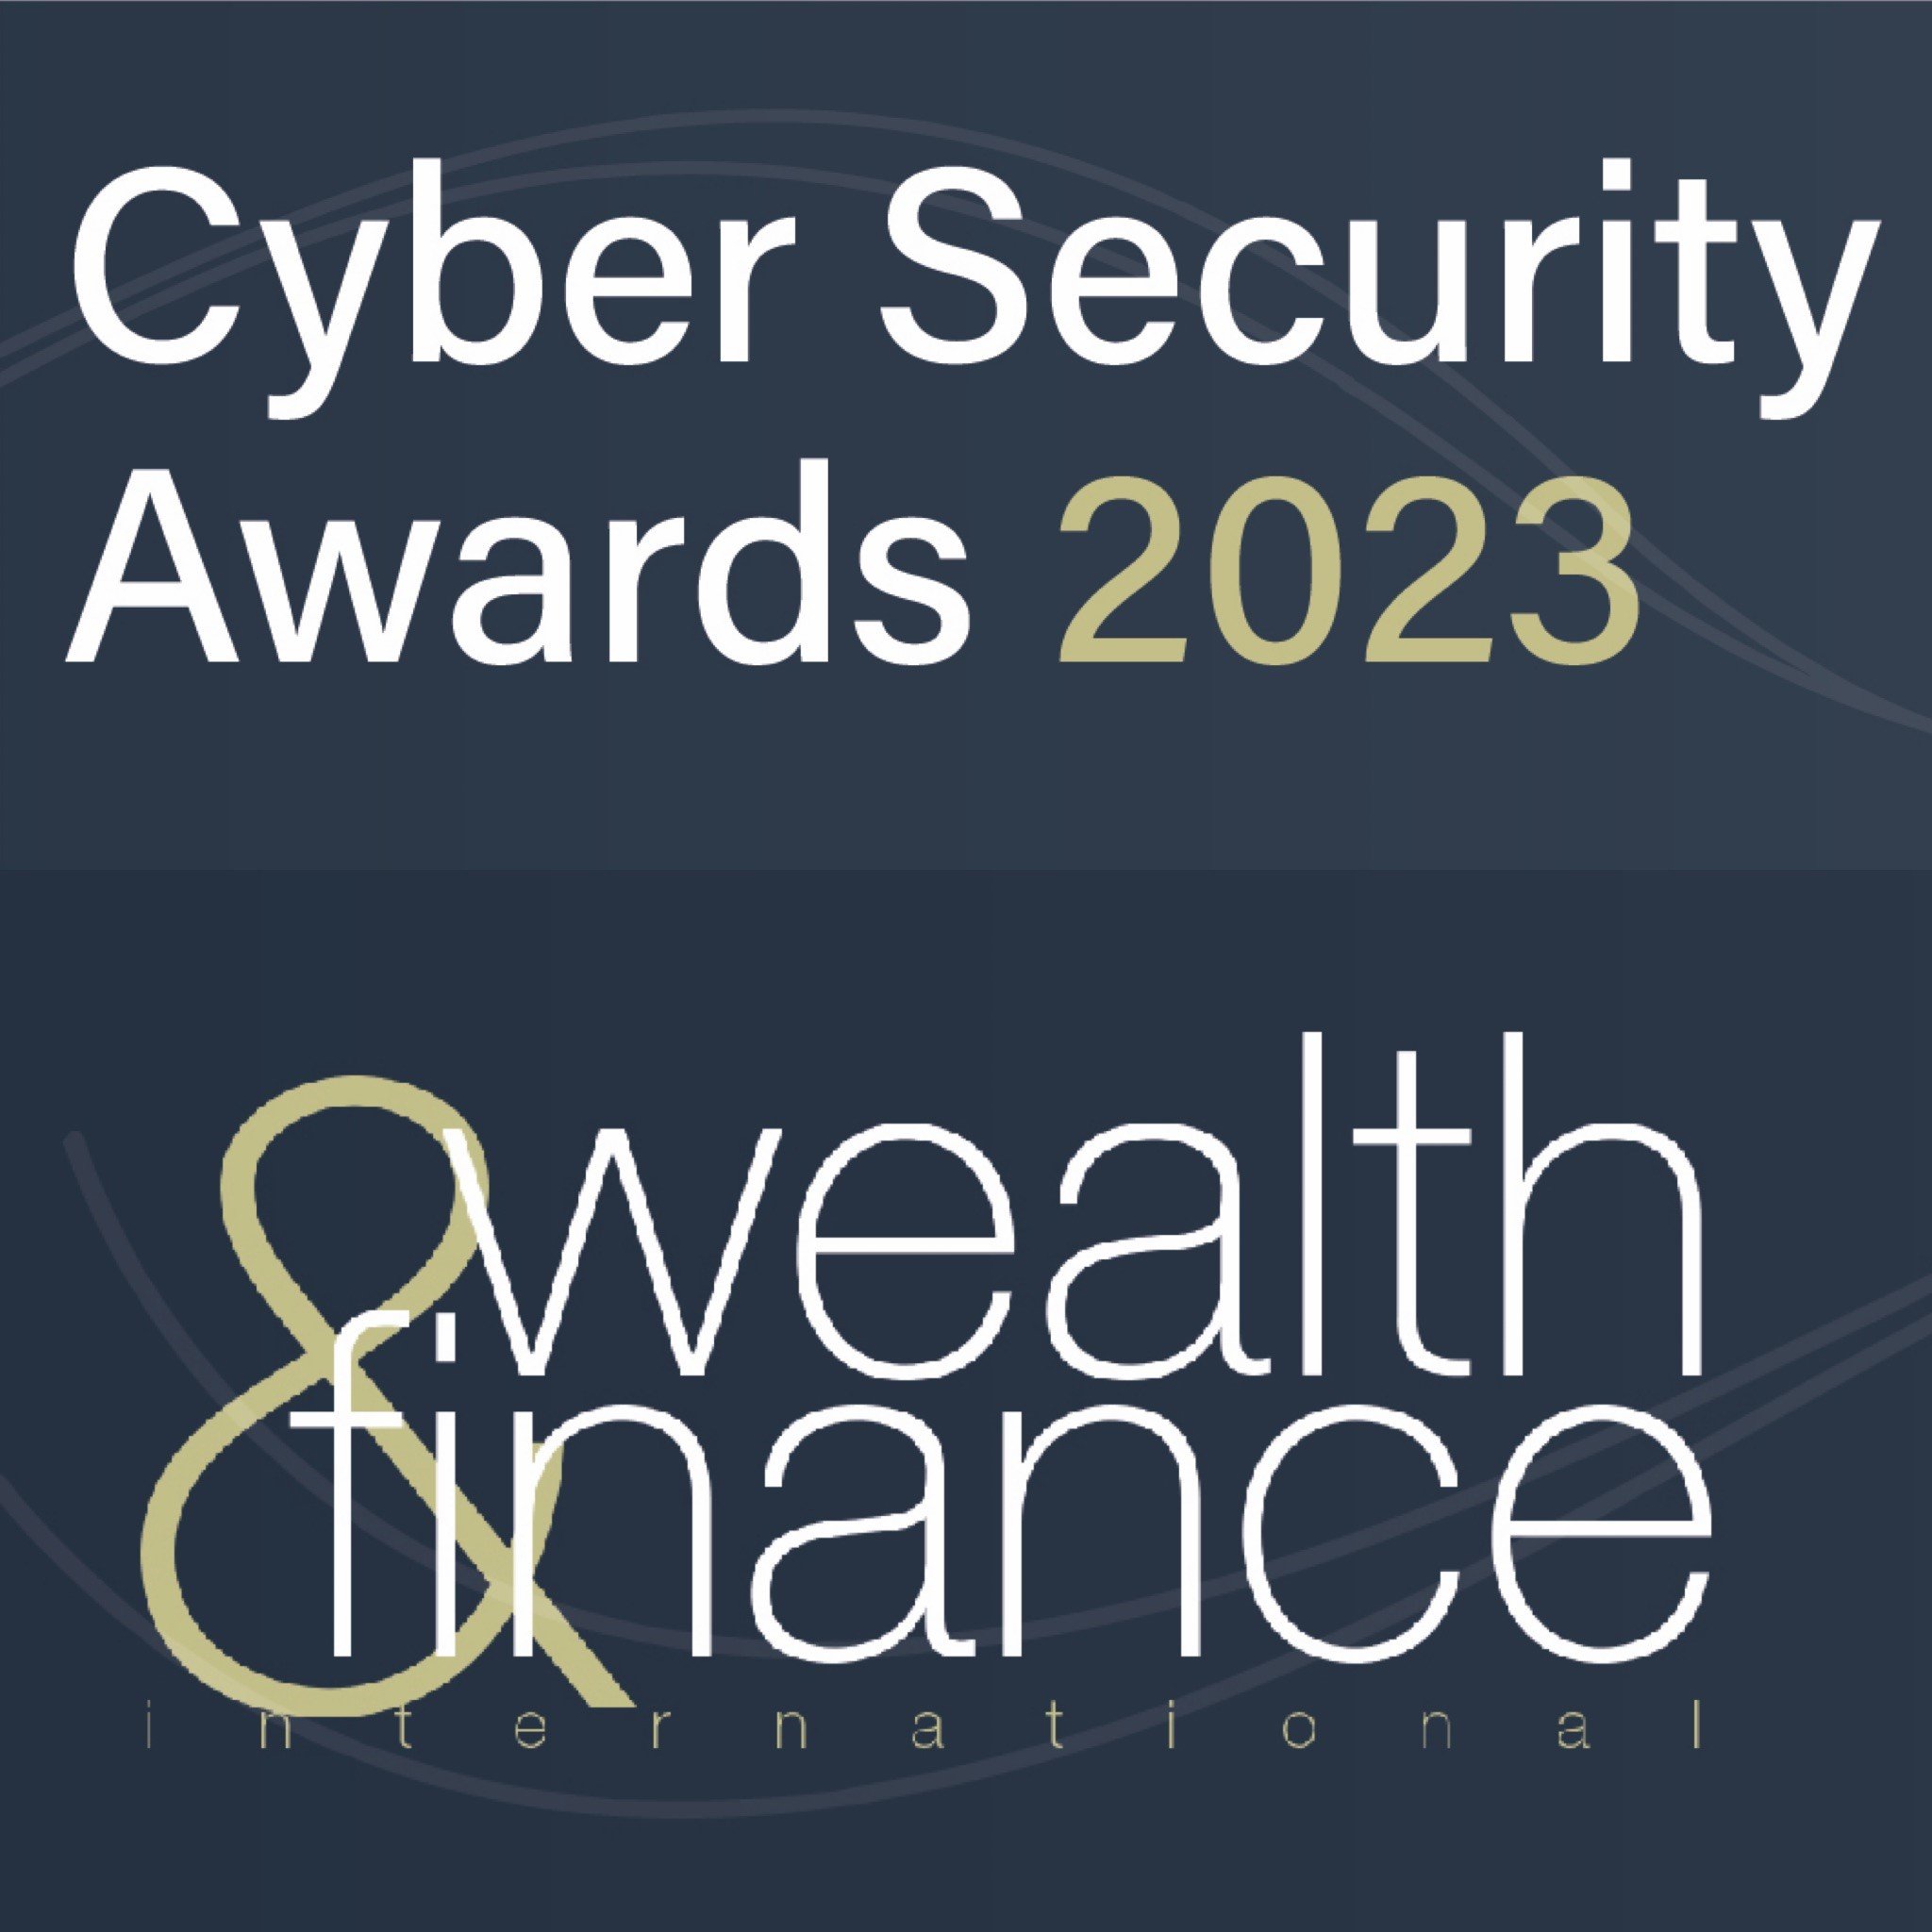 Cyber Security Awards Logo 2023 Stacked (by us)